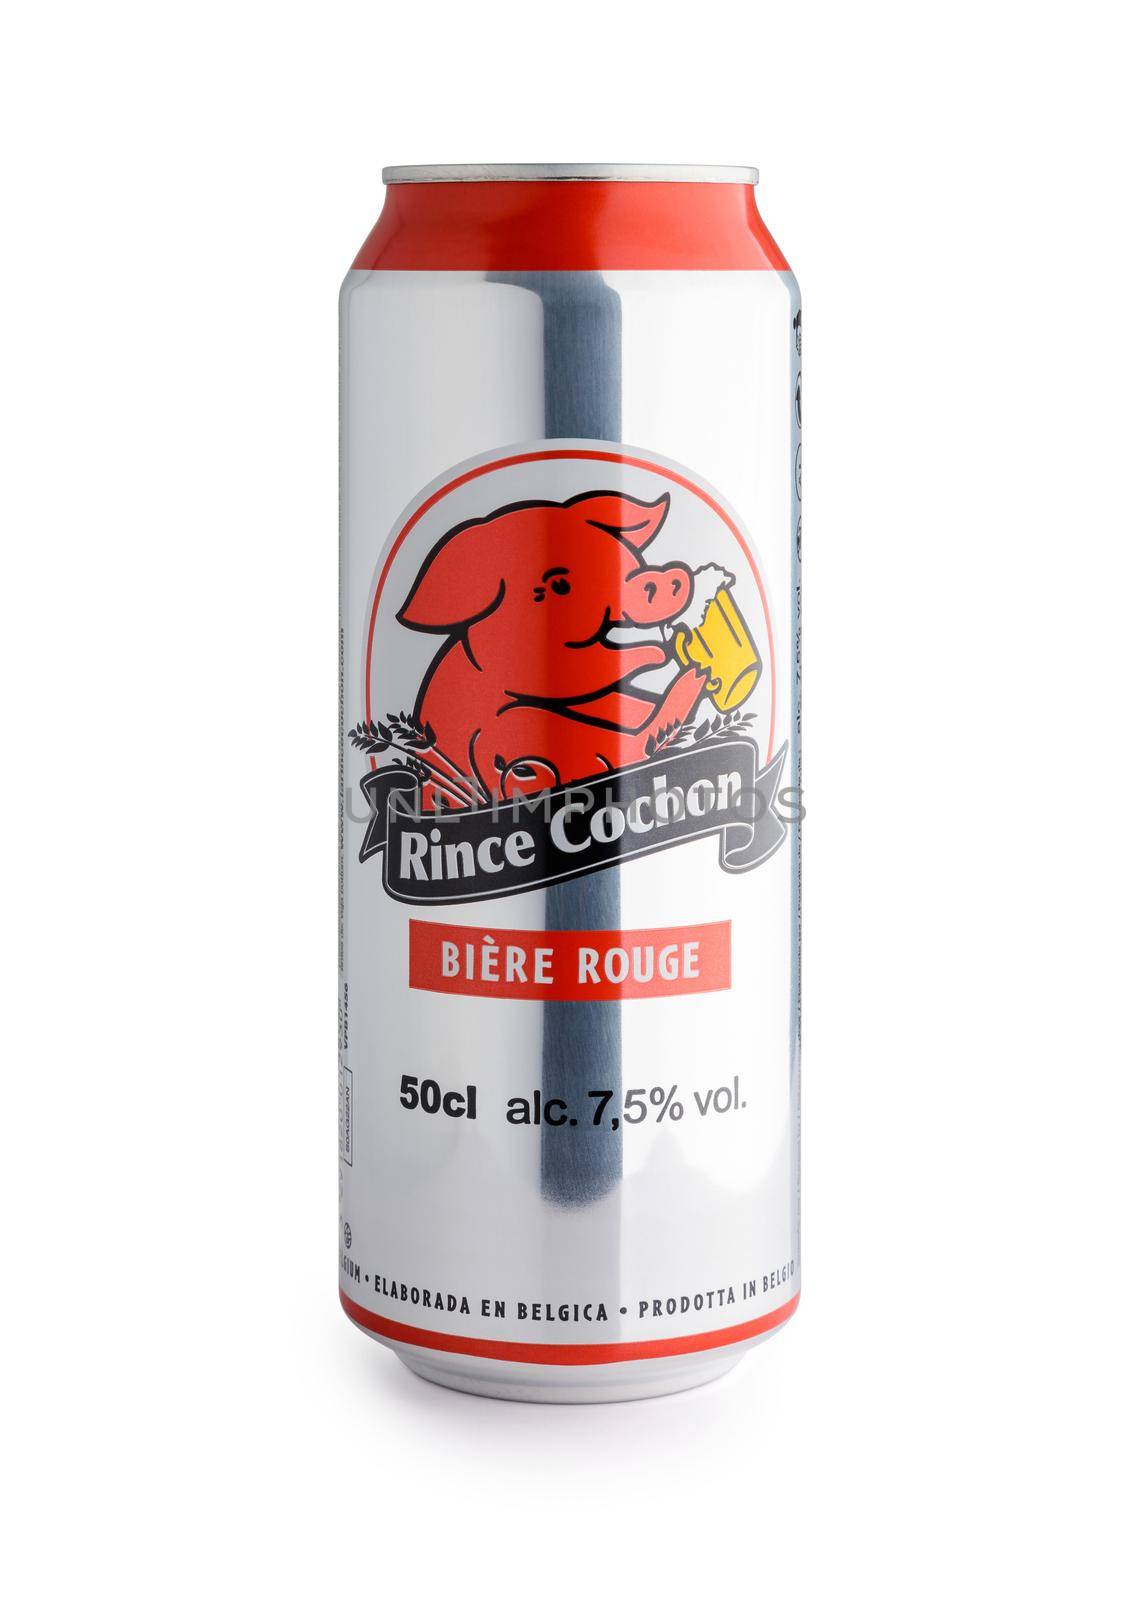 BAYONNE, FRANCE - CIRCA JANUARY 2021: A 50cl can of red Rince Cochon beer on white background. The red Rince Cochon is flavoured with red fruits, mainly cherries.